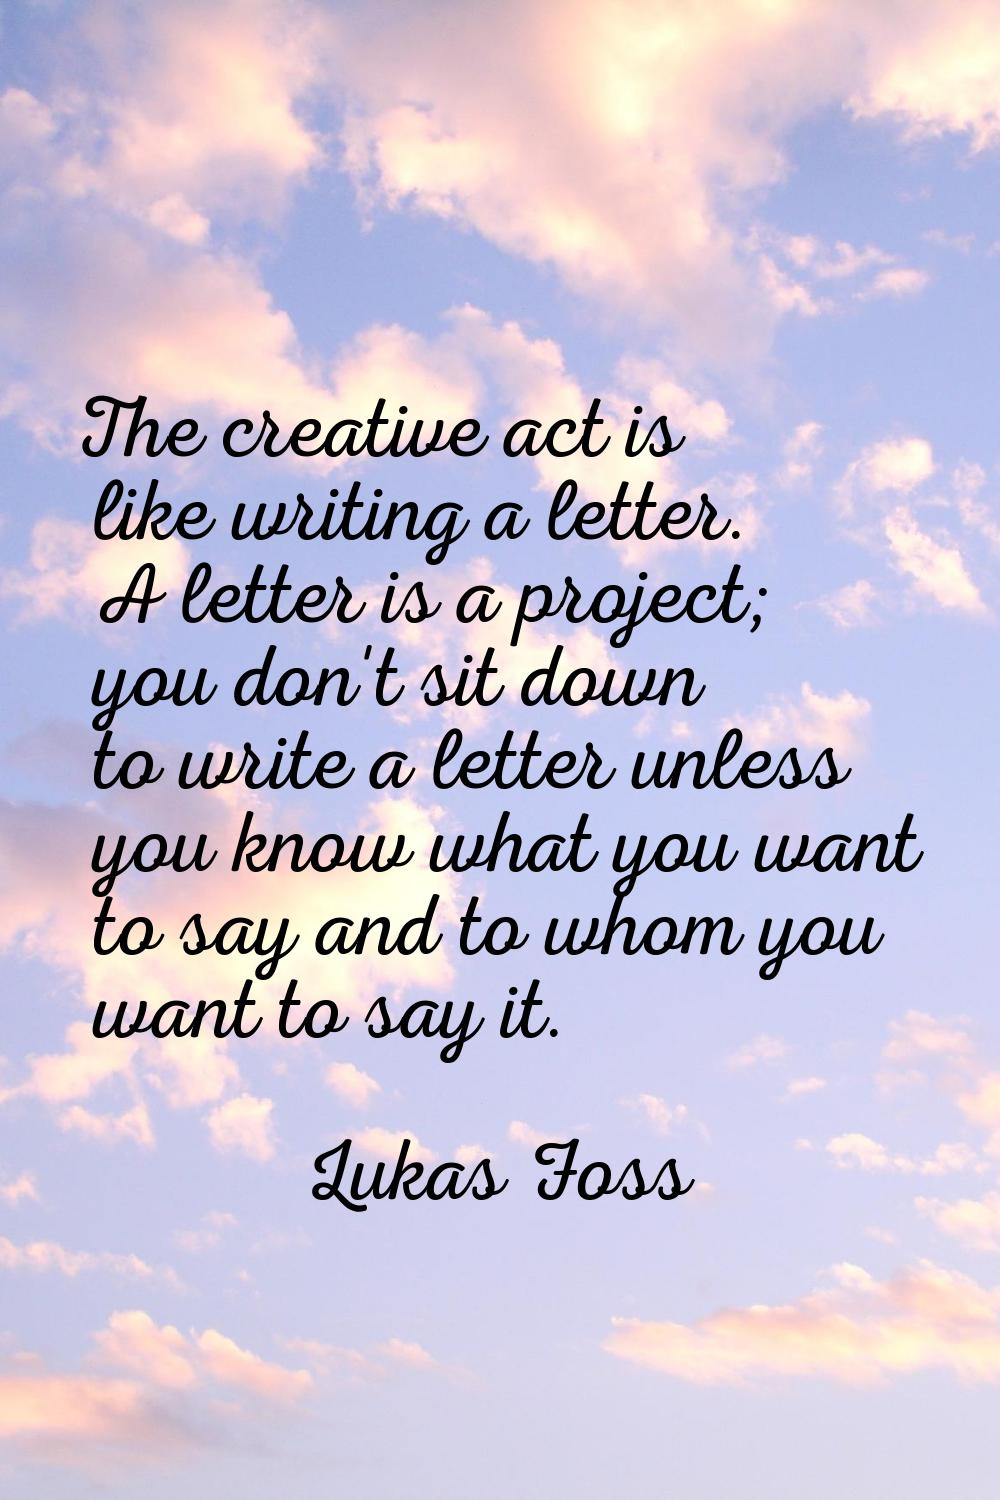 The creative act is like writing a letter. A letter is a project; you don't sit down to write a let